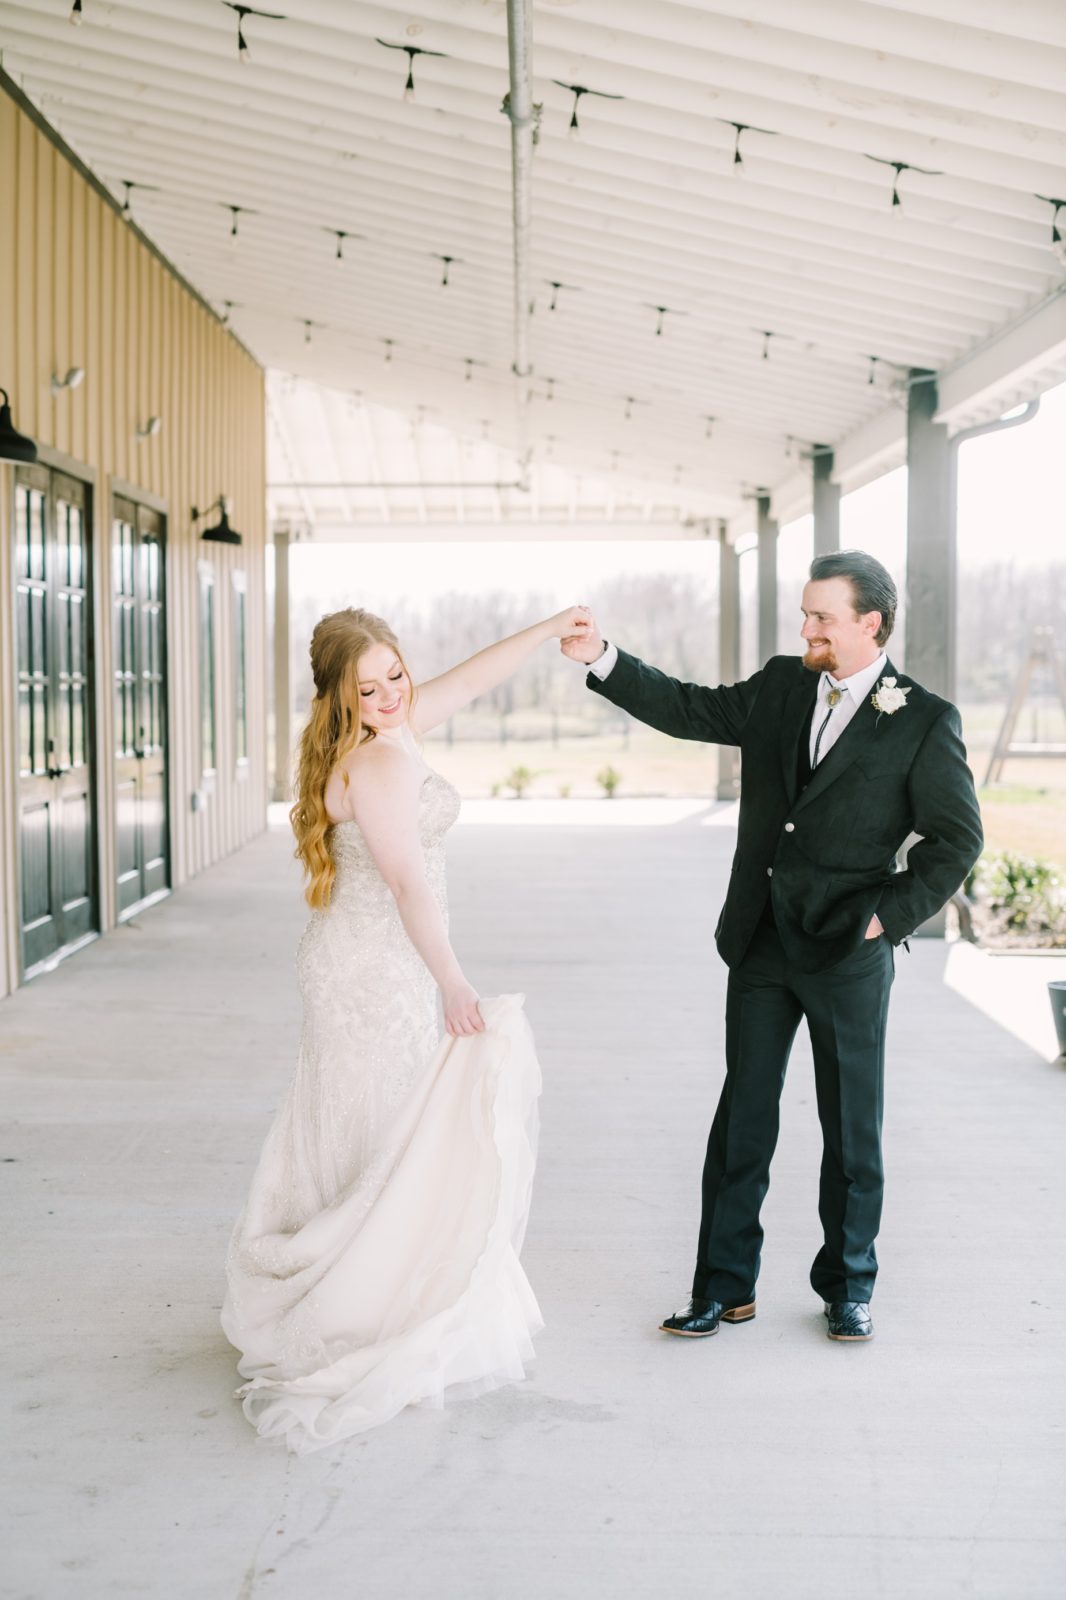 A bride spins in her wedding dress while holding the groom's hand by Christina Elliott Photography. dancing bridal portrait #ChristinaElliottPhotography #ChristinaElliottWeddings #StillWatersRanchWedding #Texasweddings #countrywedding #ranchwedding